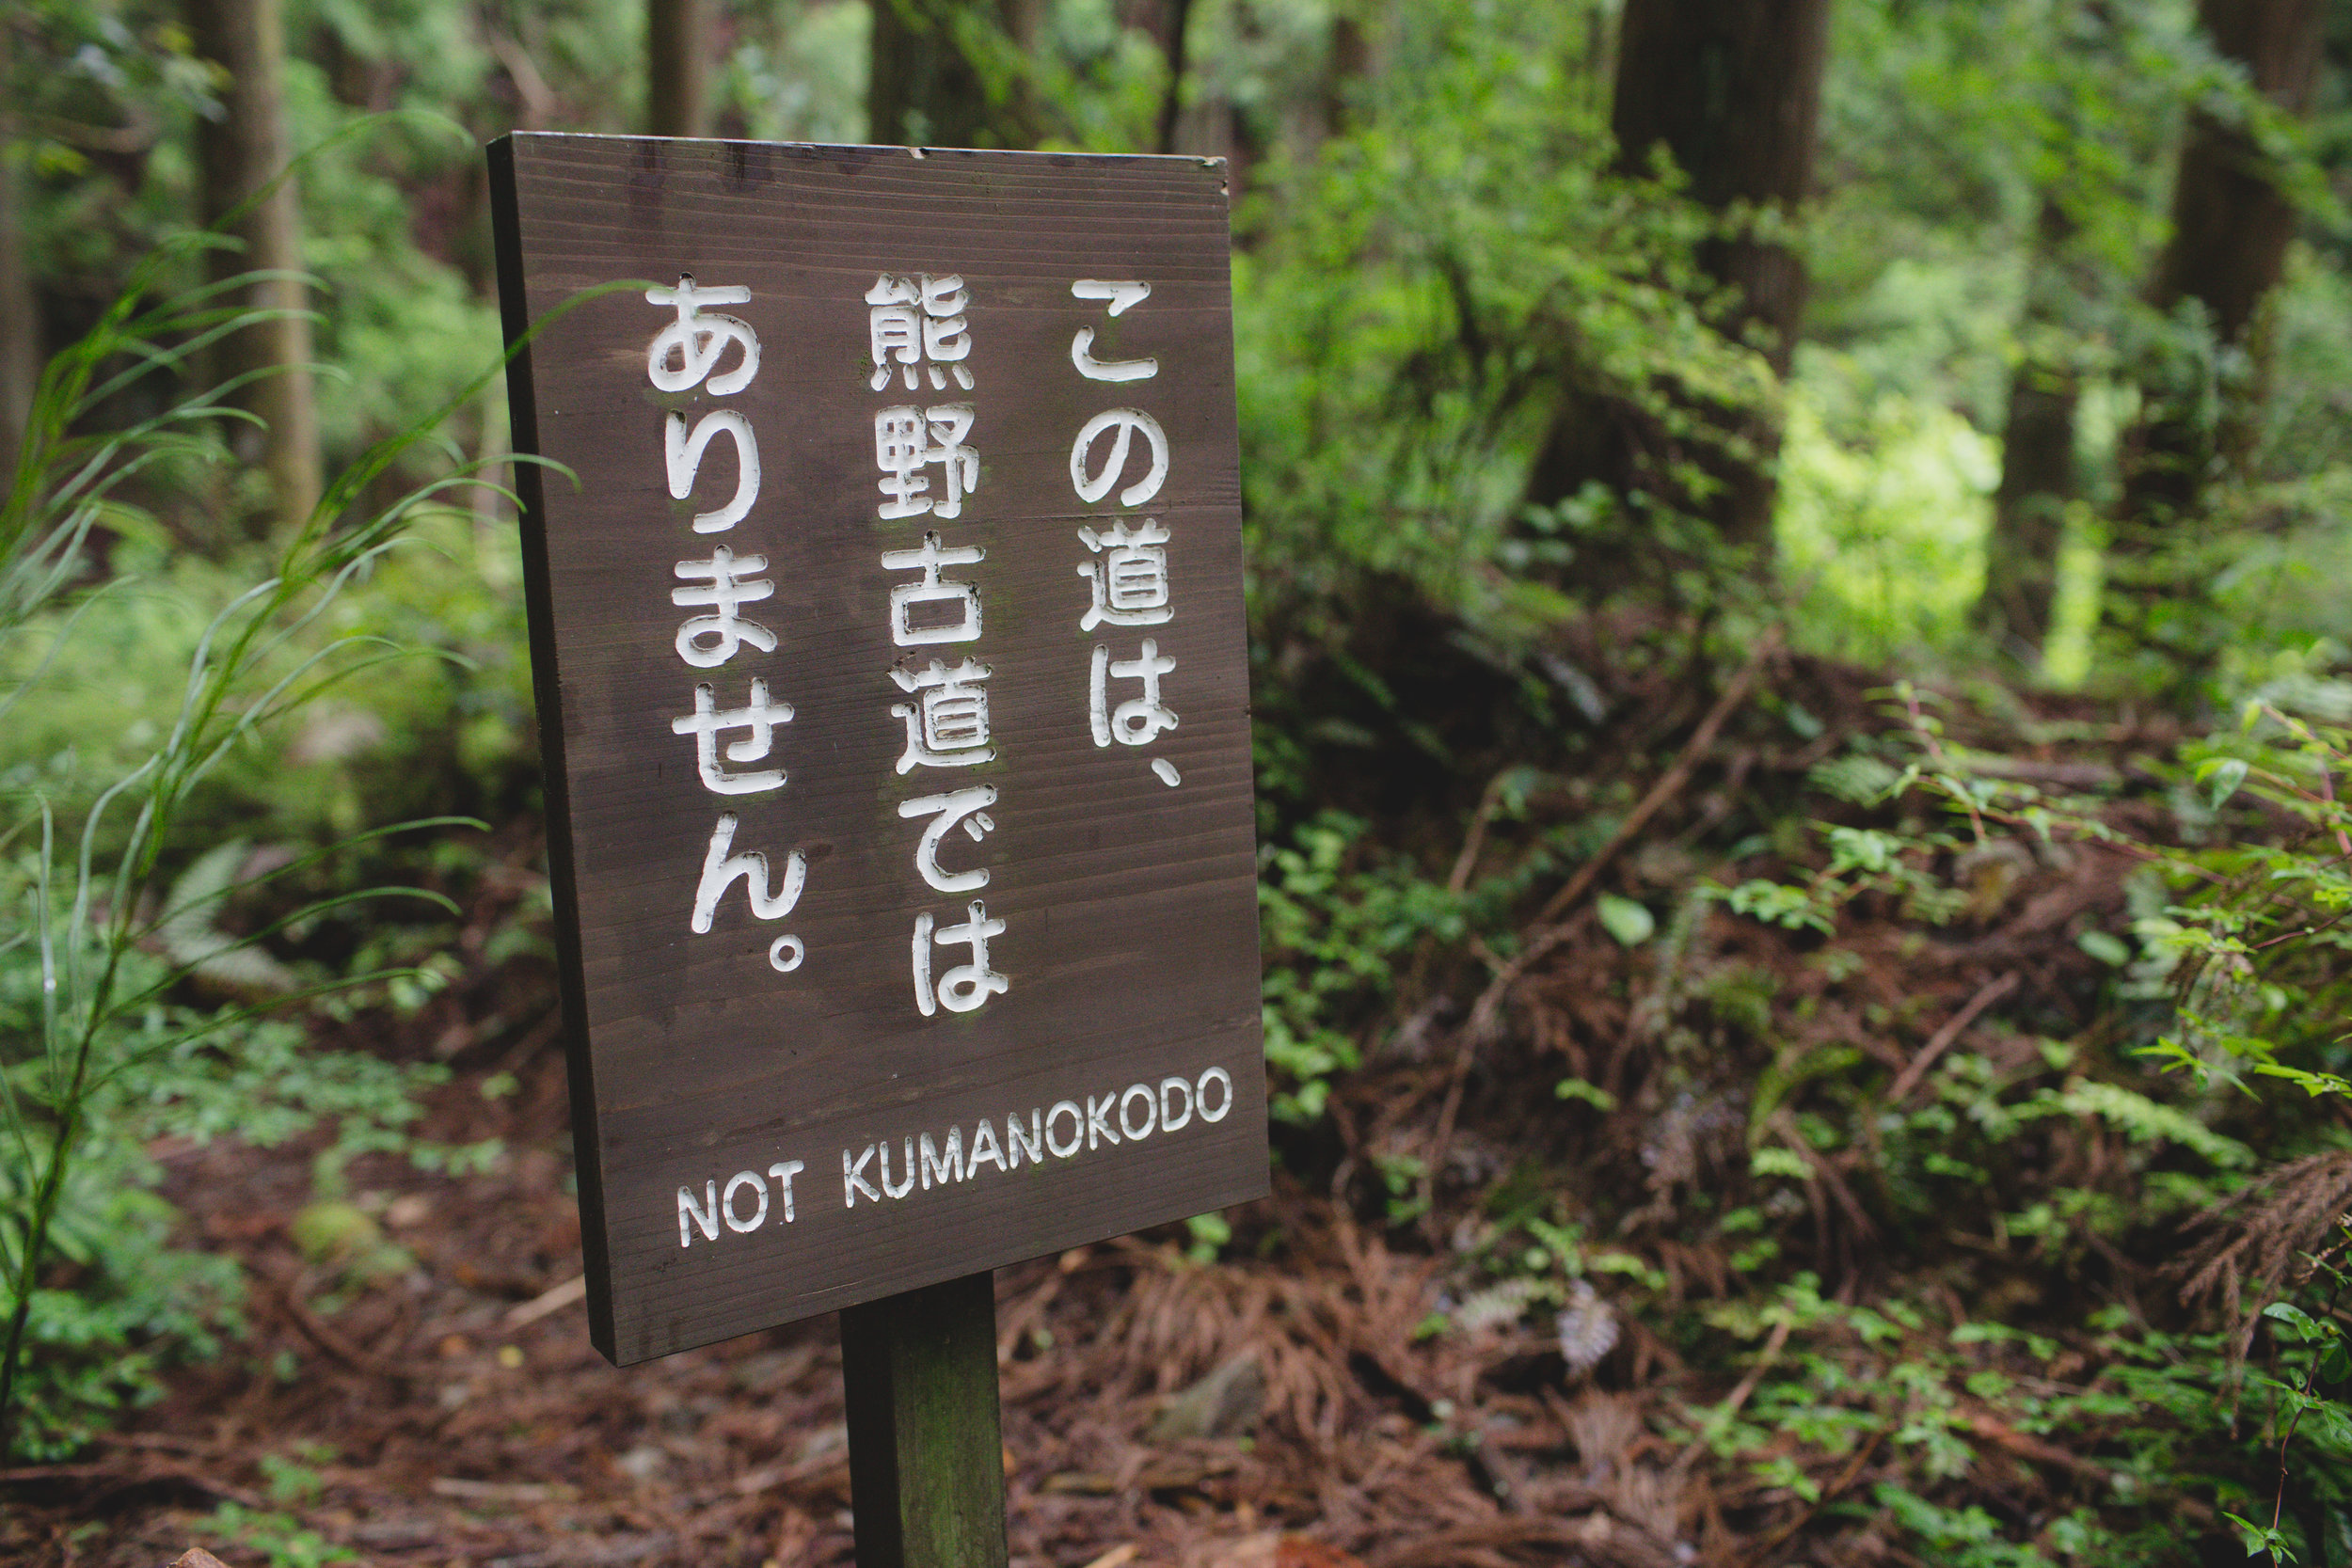  The path was well marked with ‘Kumano Kodo’ signs and ‘Not Kumano Kodo’ signs 